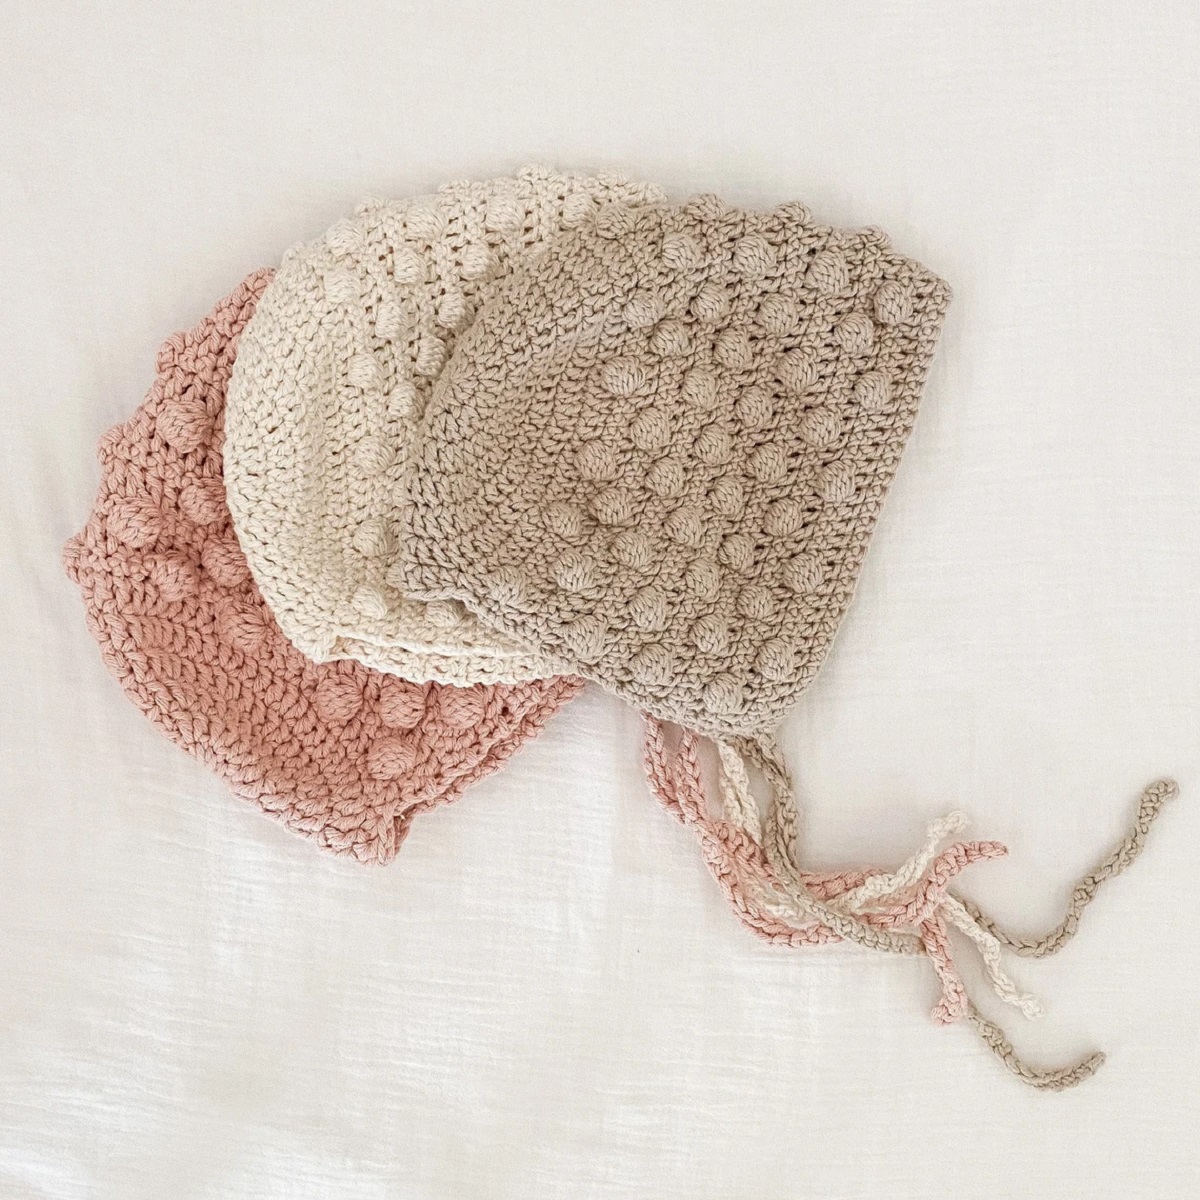  Beige, white, and pale pink crochet bonnets lying on top of each other with small circles stitched in and braided string to secure the bonnets.